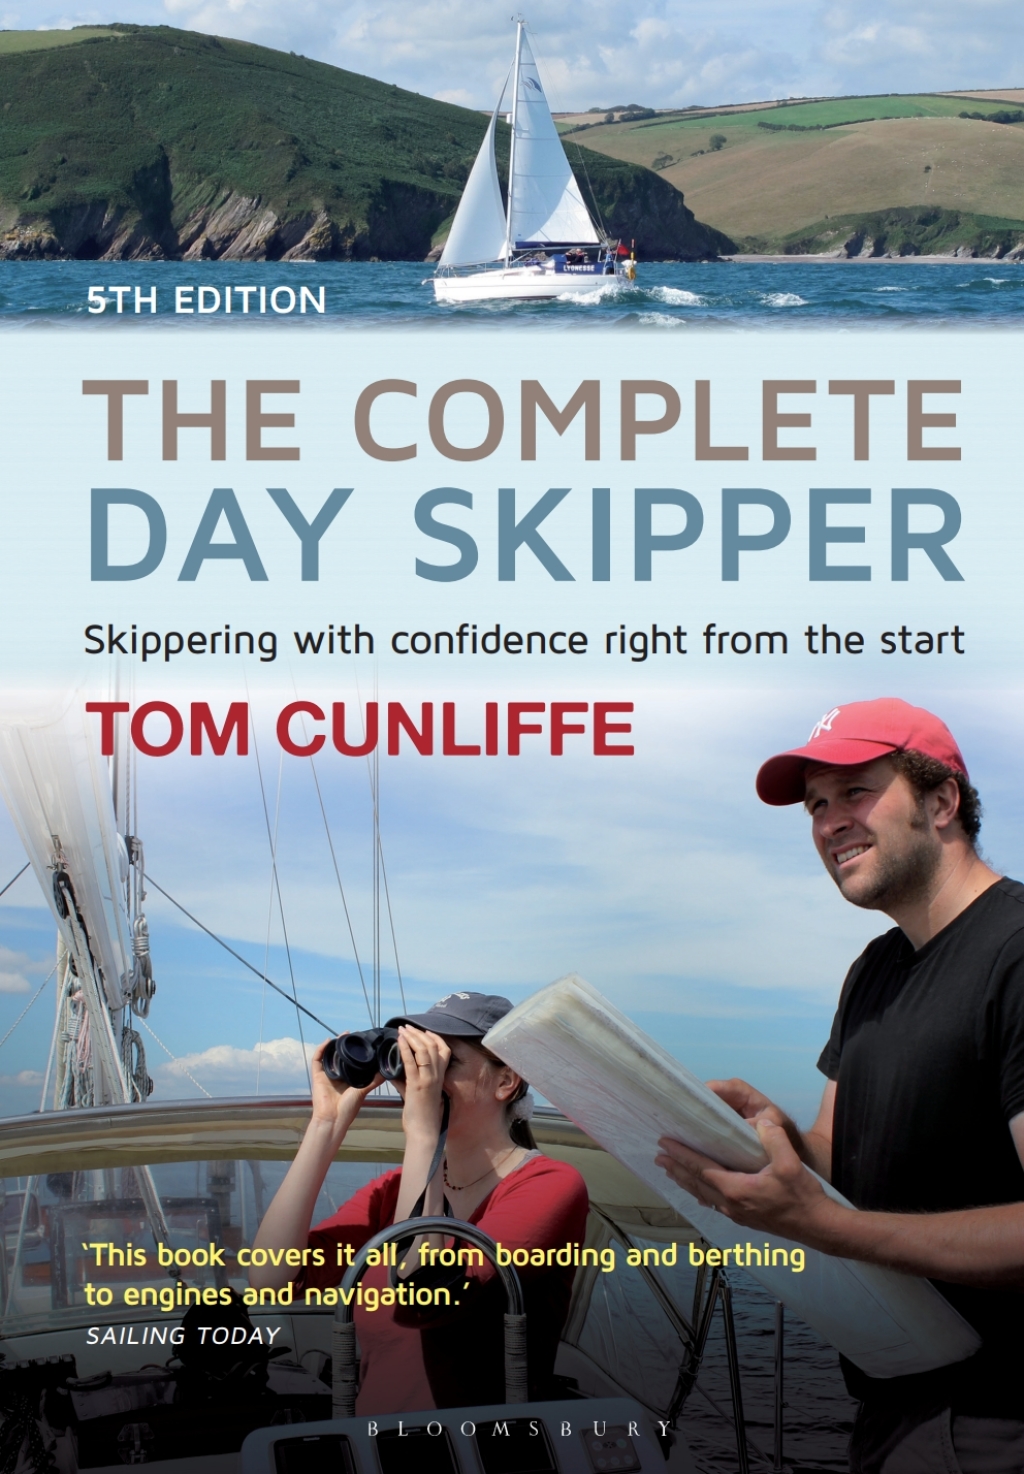 The Complete Day Skipper (eBook) - Tom Cunliffe